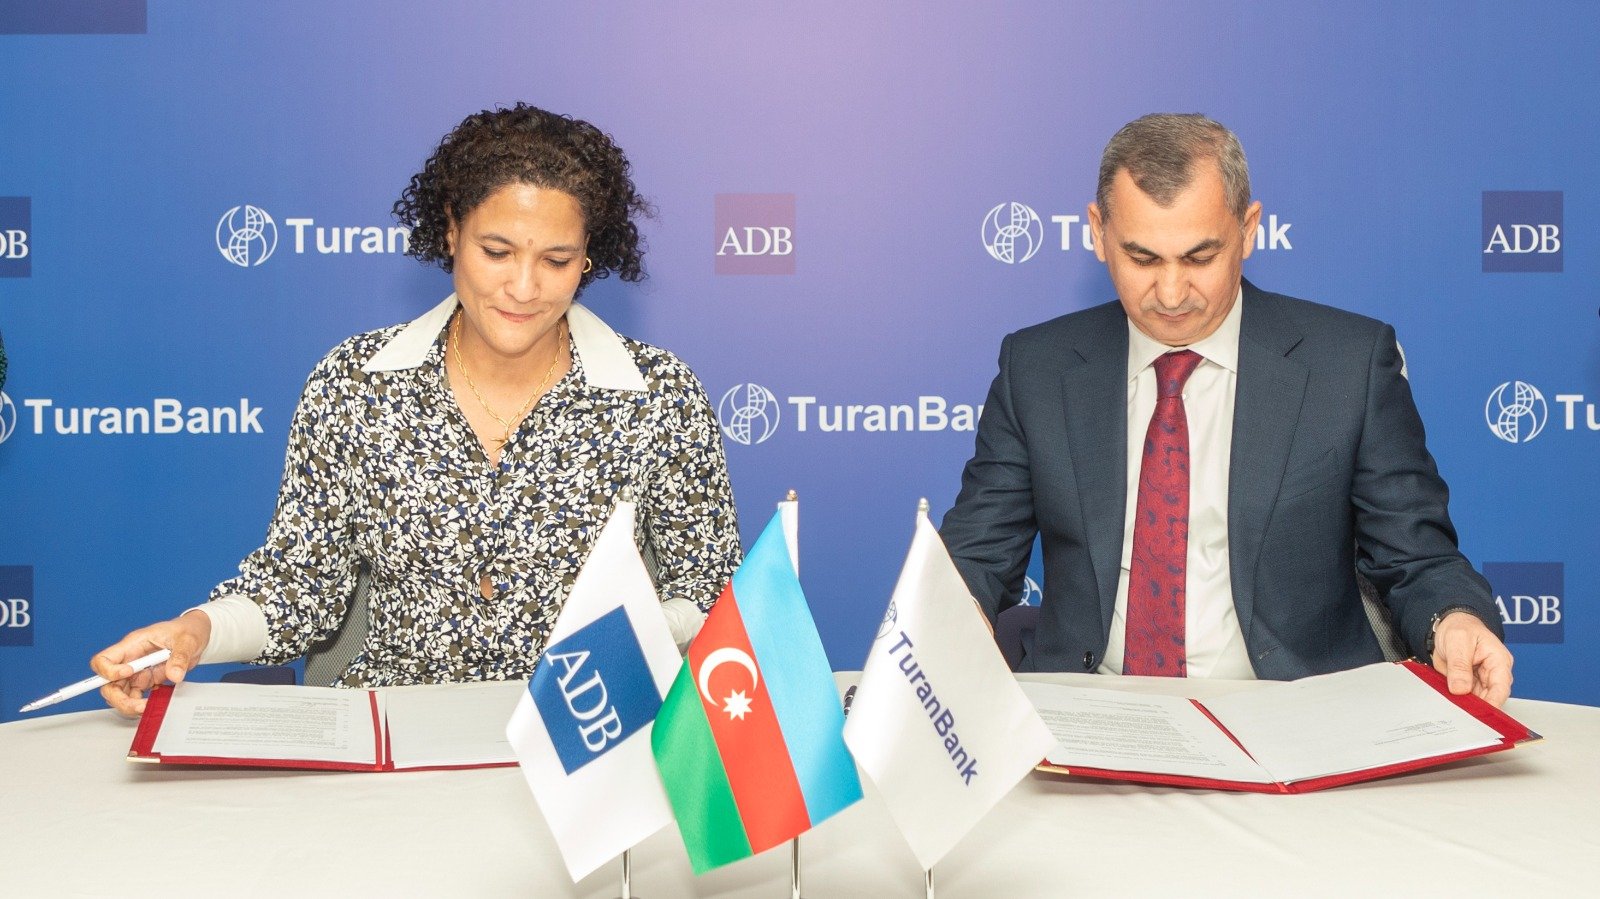 A trade financing agreement was concluded between TuranBank and Asian Development Bank (PHOTO)